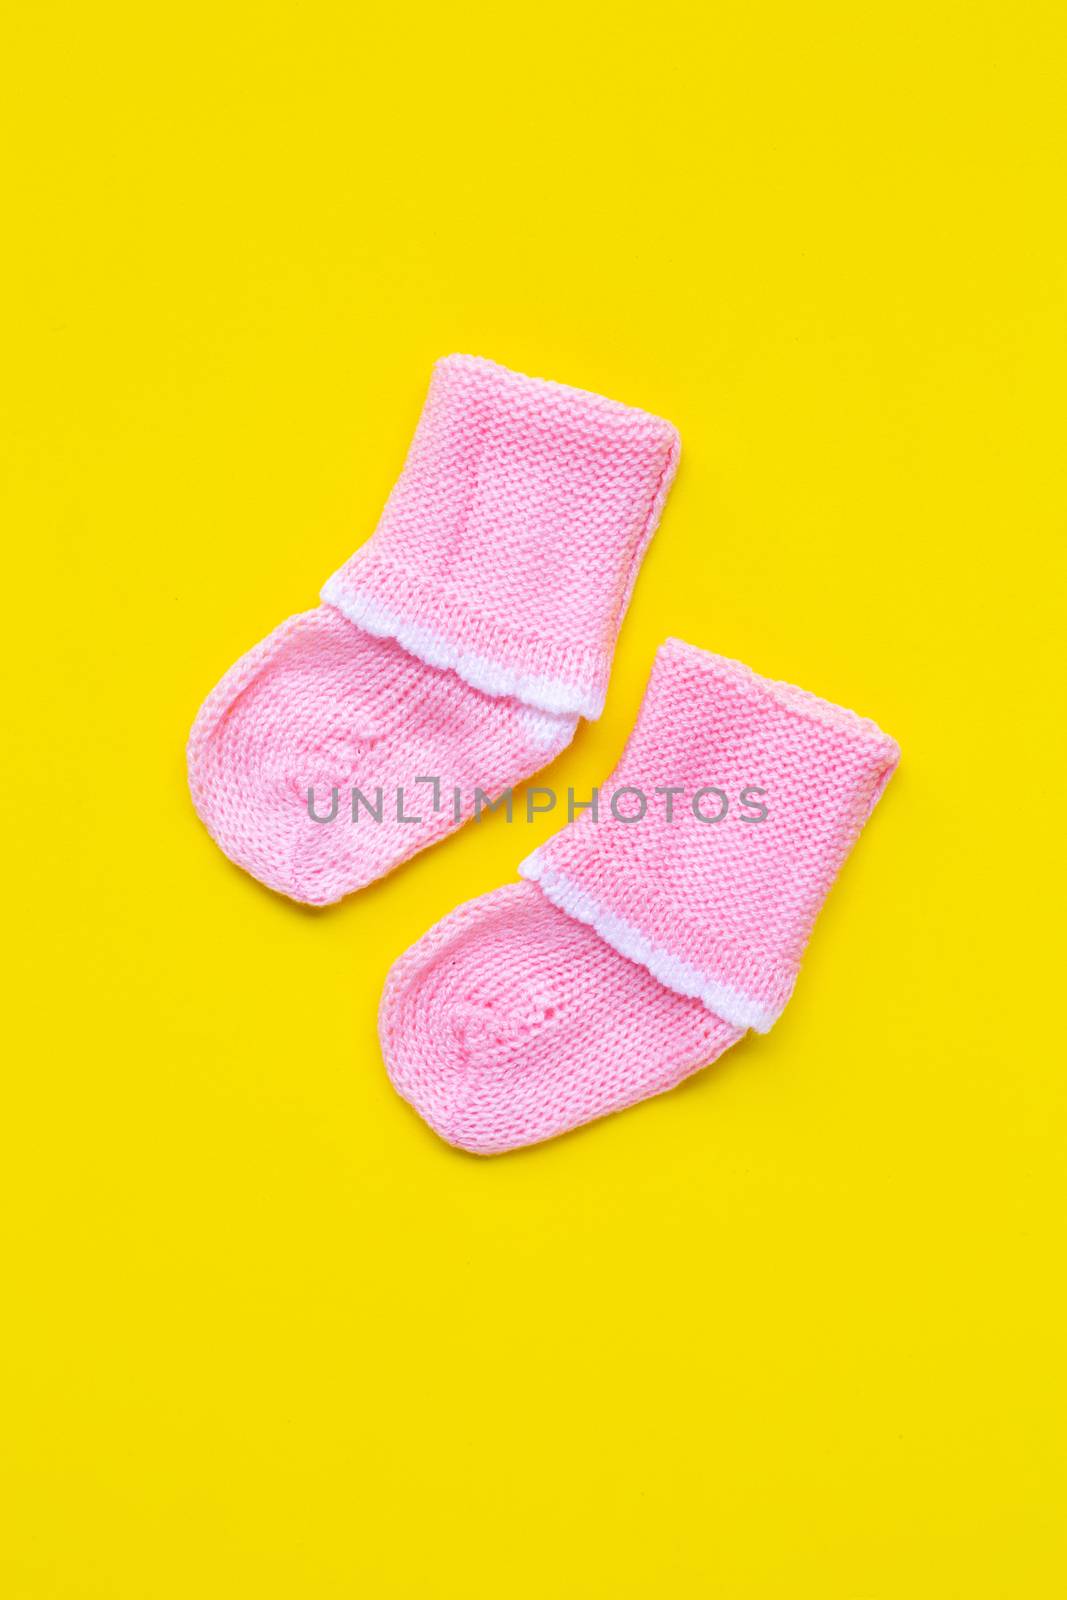 Baby socks on yellow background. by Bowonpat